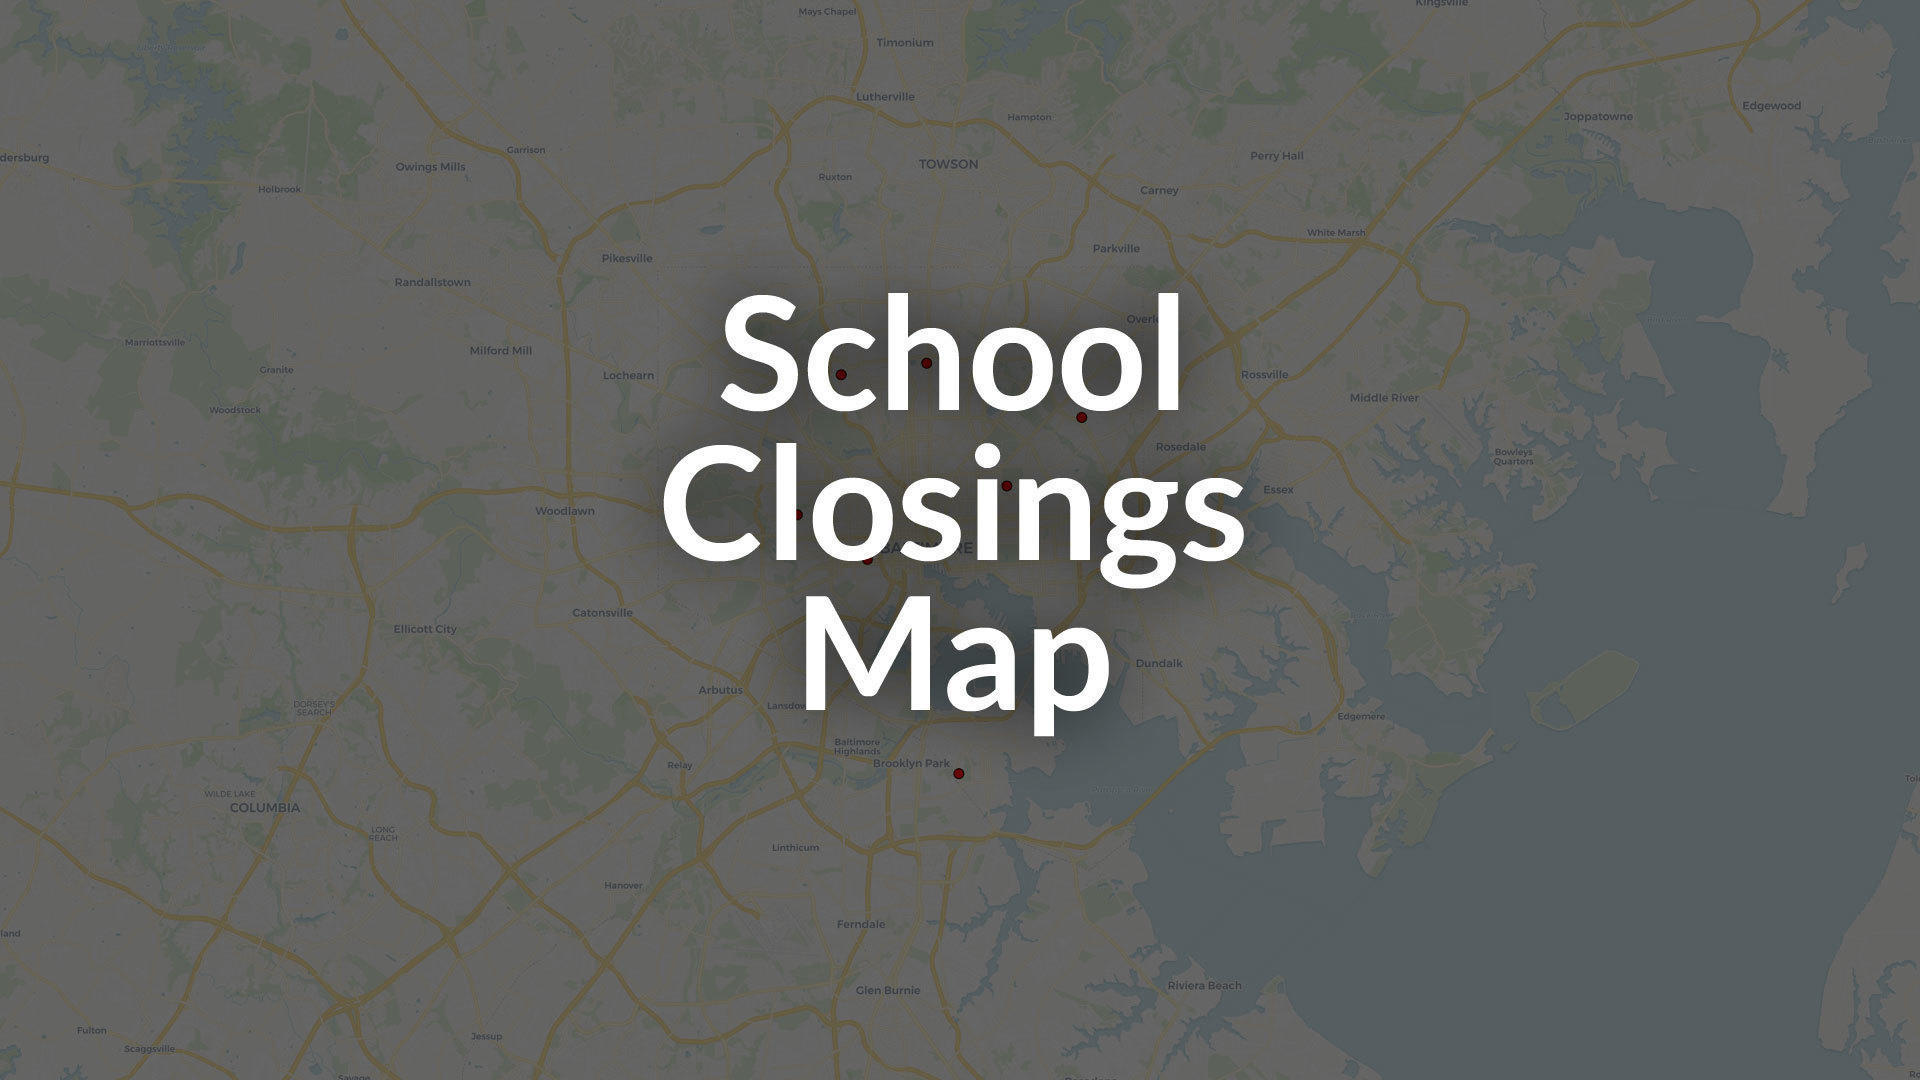 Map: Baltimore City Schools closed because of heat, facility issues - Baltimore Sun1920 x 1080